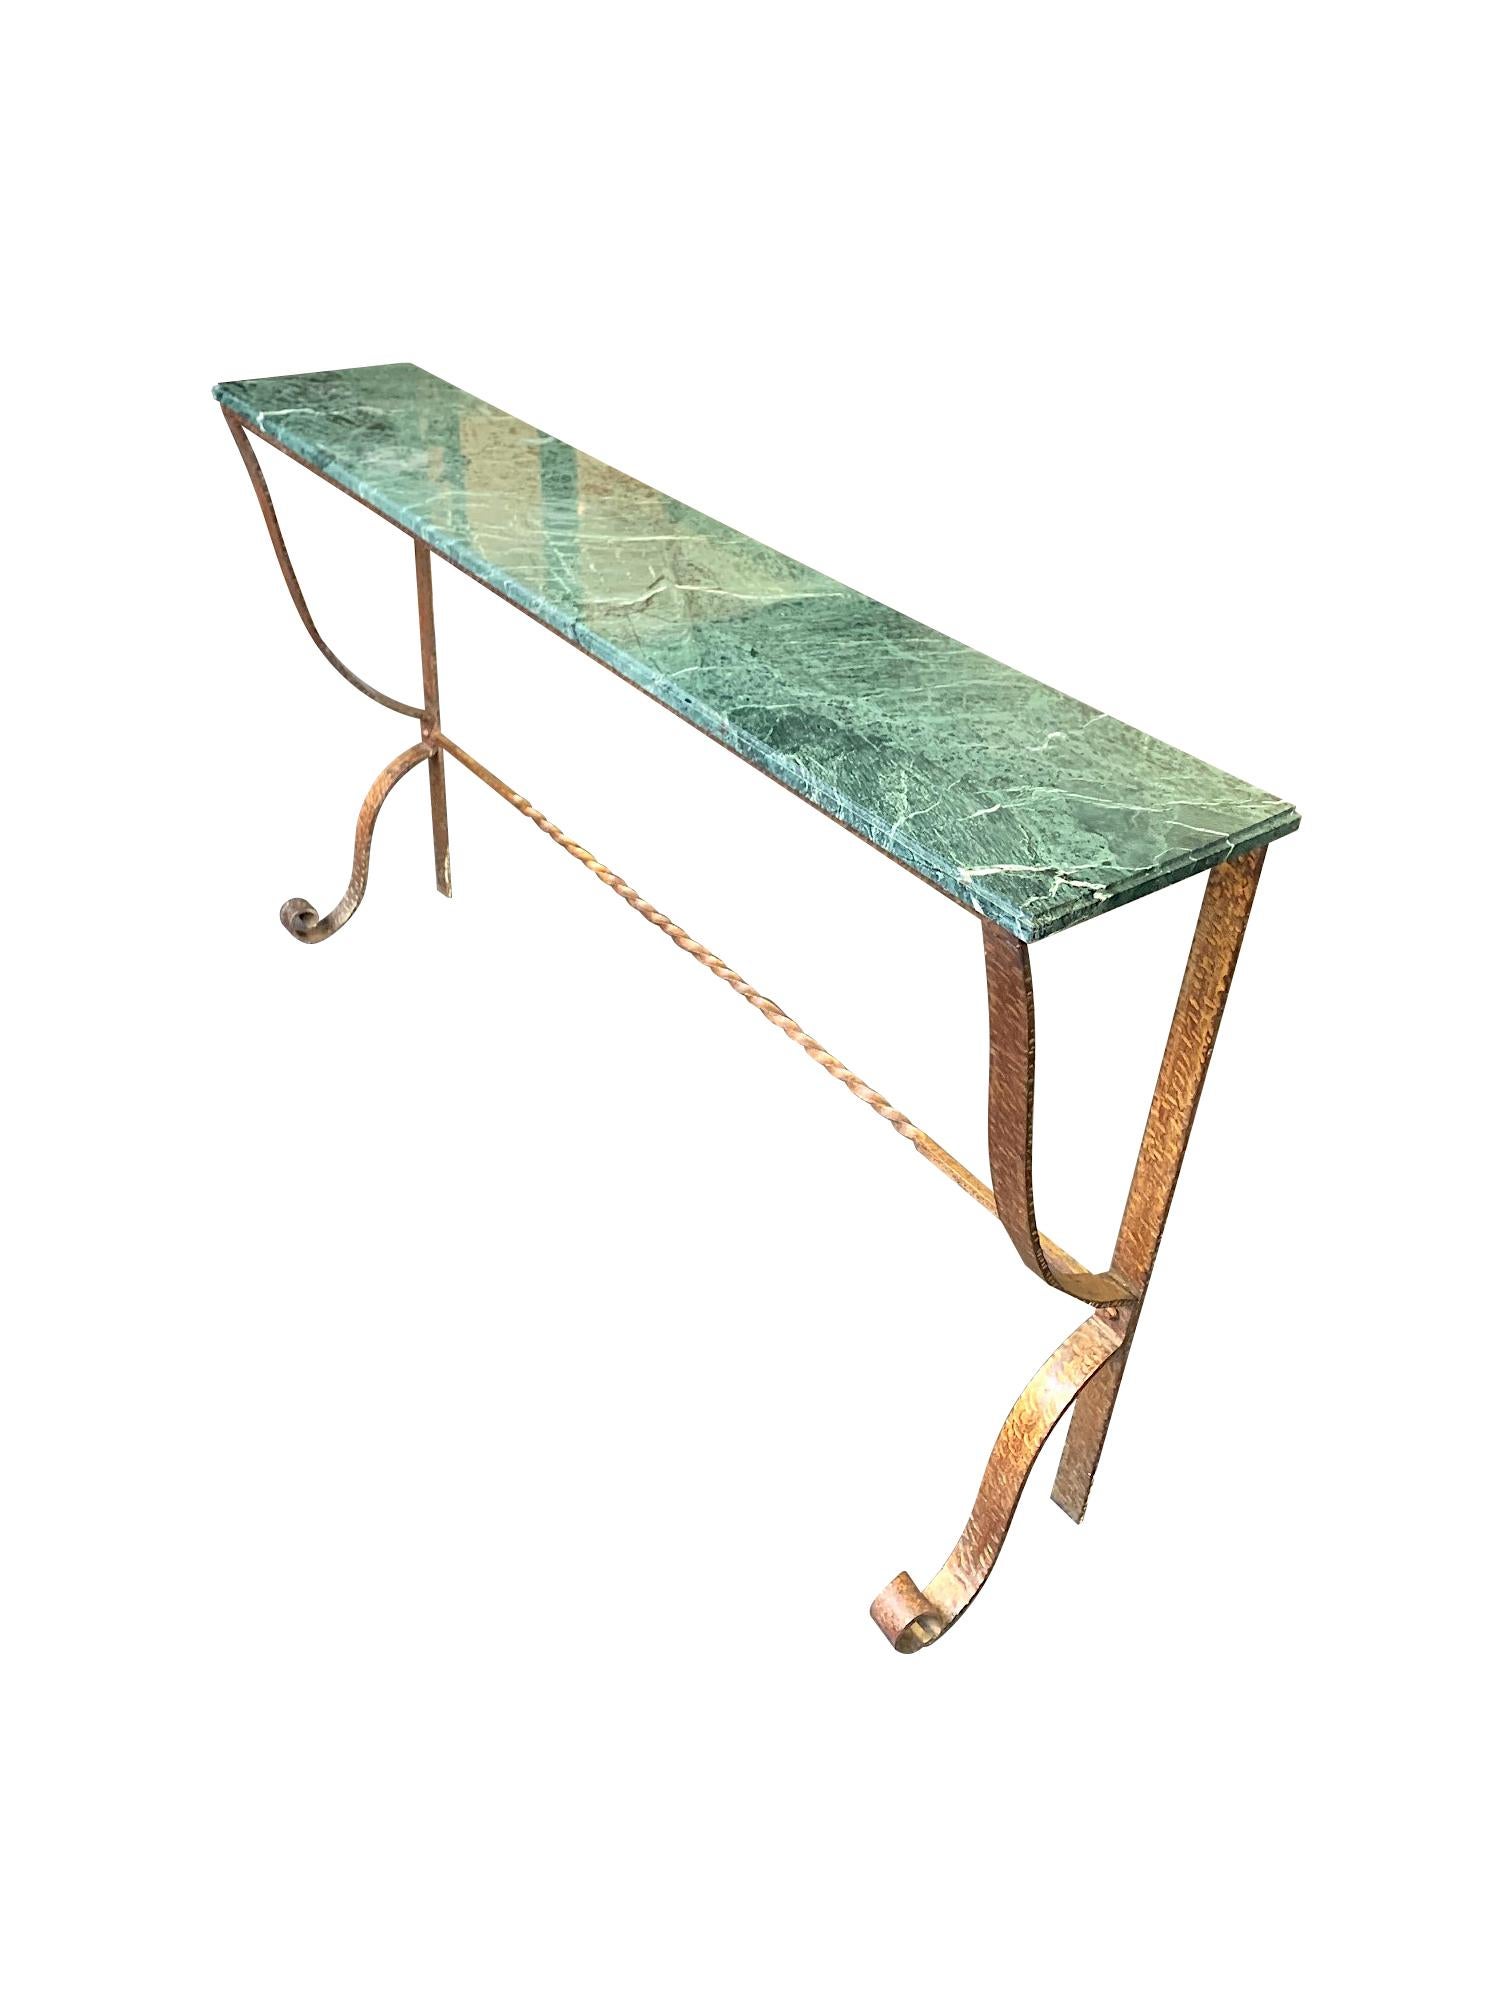 A decorative Spanish 1950s console with hammered and scrolling wrought iron gilt legs and frame with a green and white bevelled marble top.